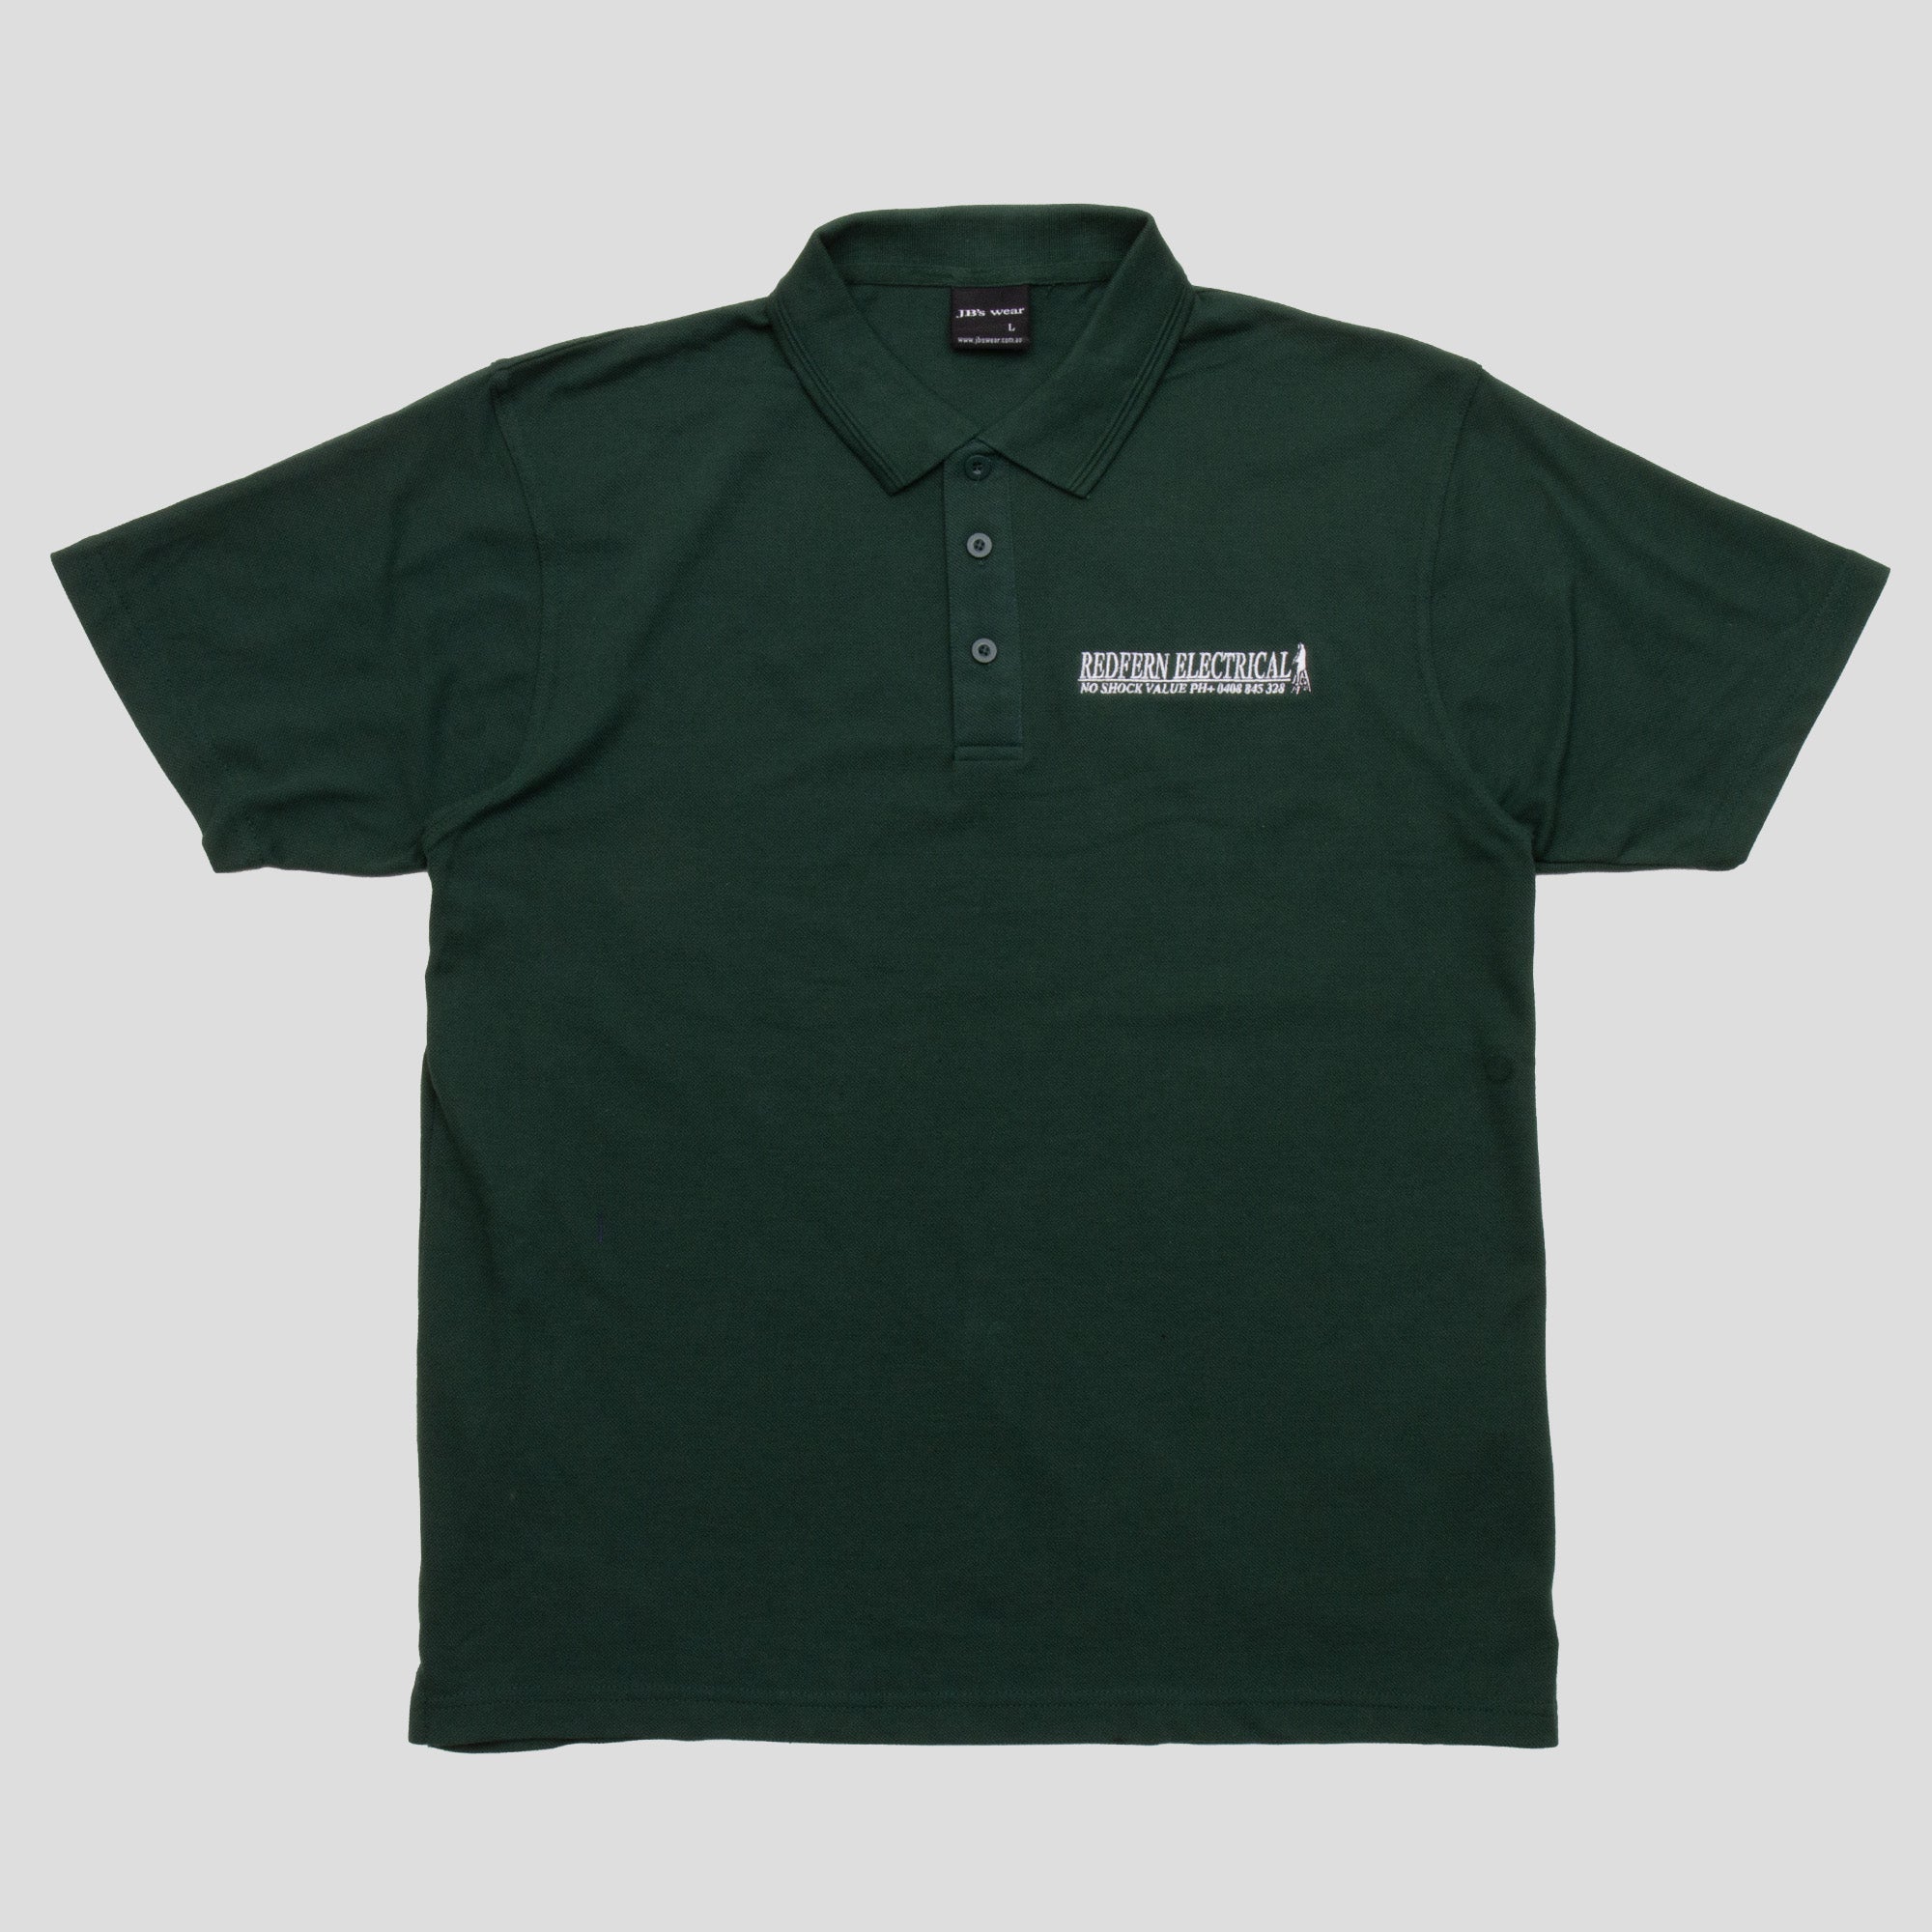 REDFERN ELECTRICAL "LADDER LIFE" POLO FOREST GREEN